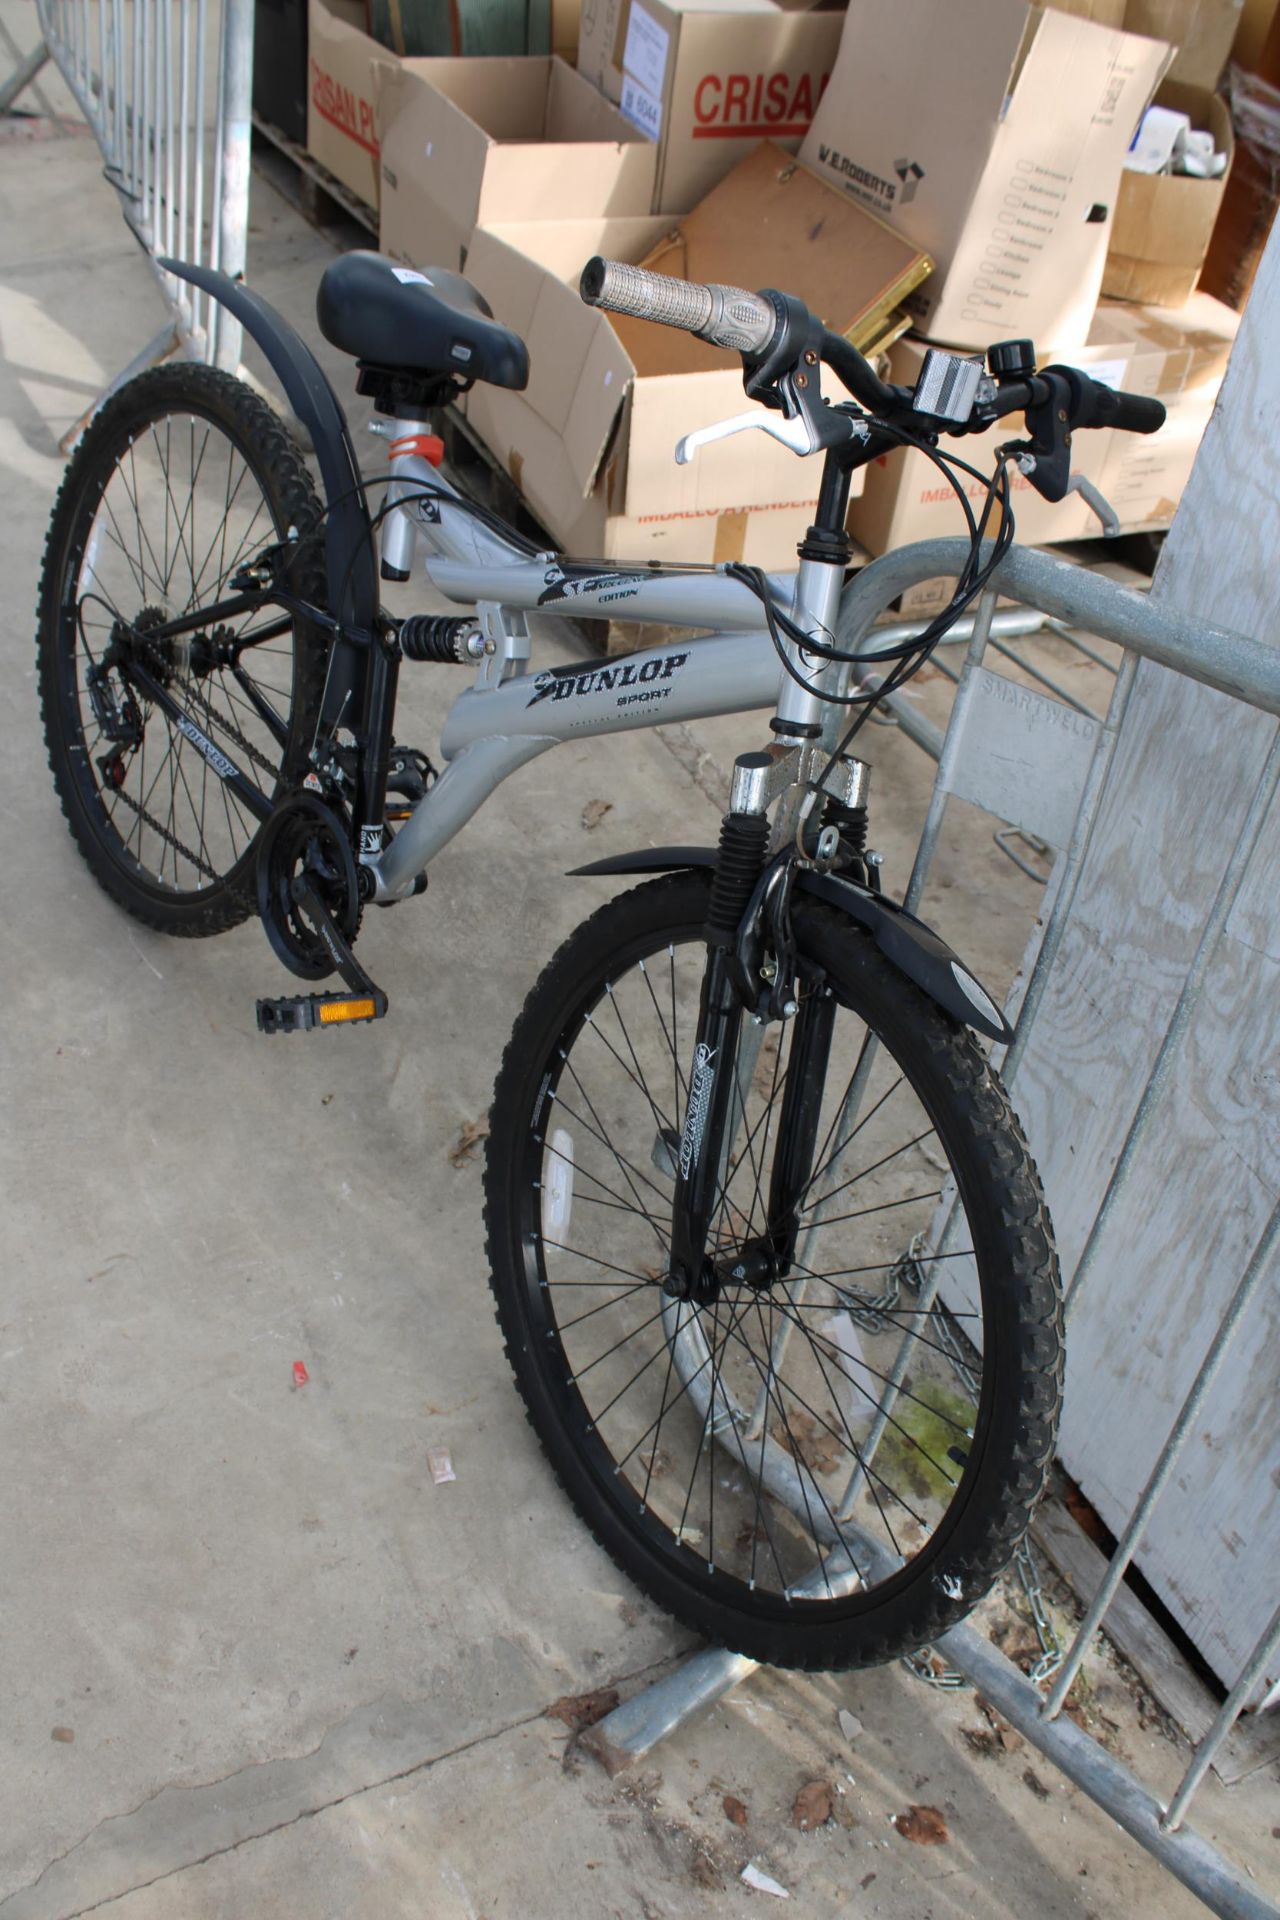 A DUNLOP SPECIAL EDITION MOUNTAIN BIKE WITH FRONT AND REAR SUSPENSION AND 18 SPEED GEAR SYSTEM - Bild 4 aus 4